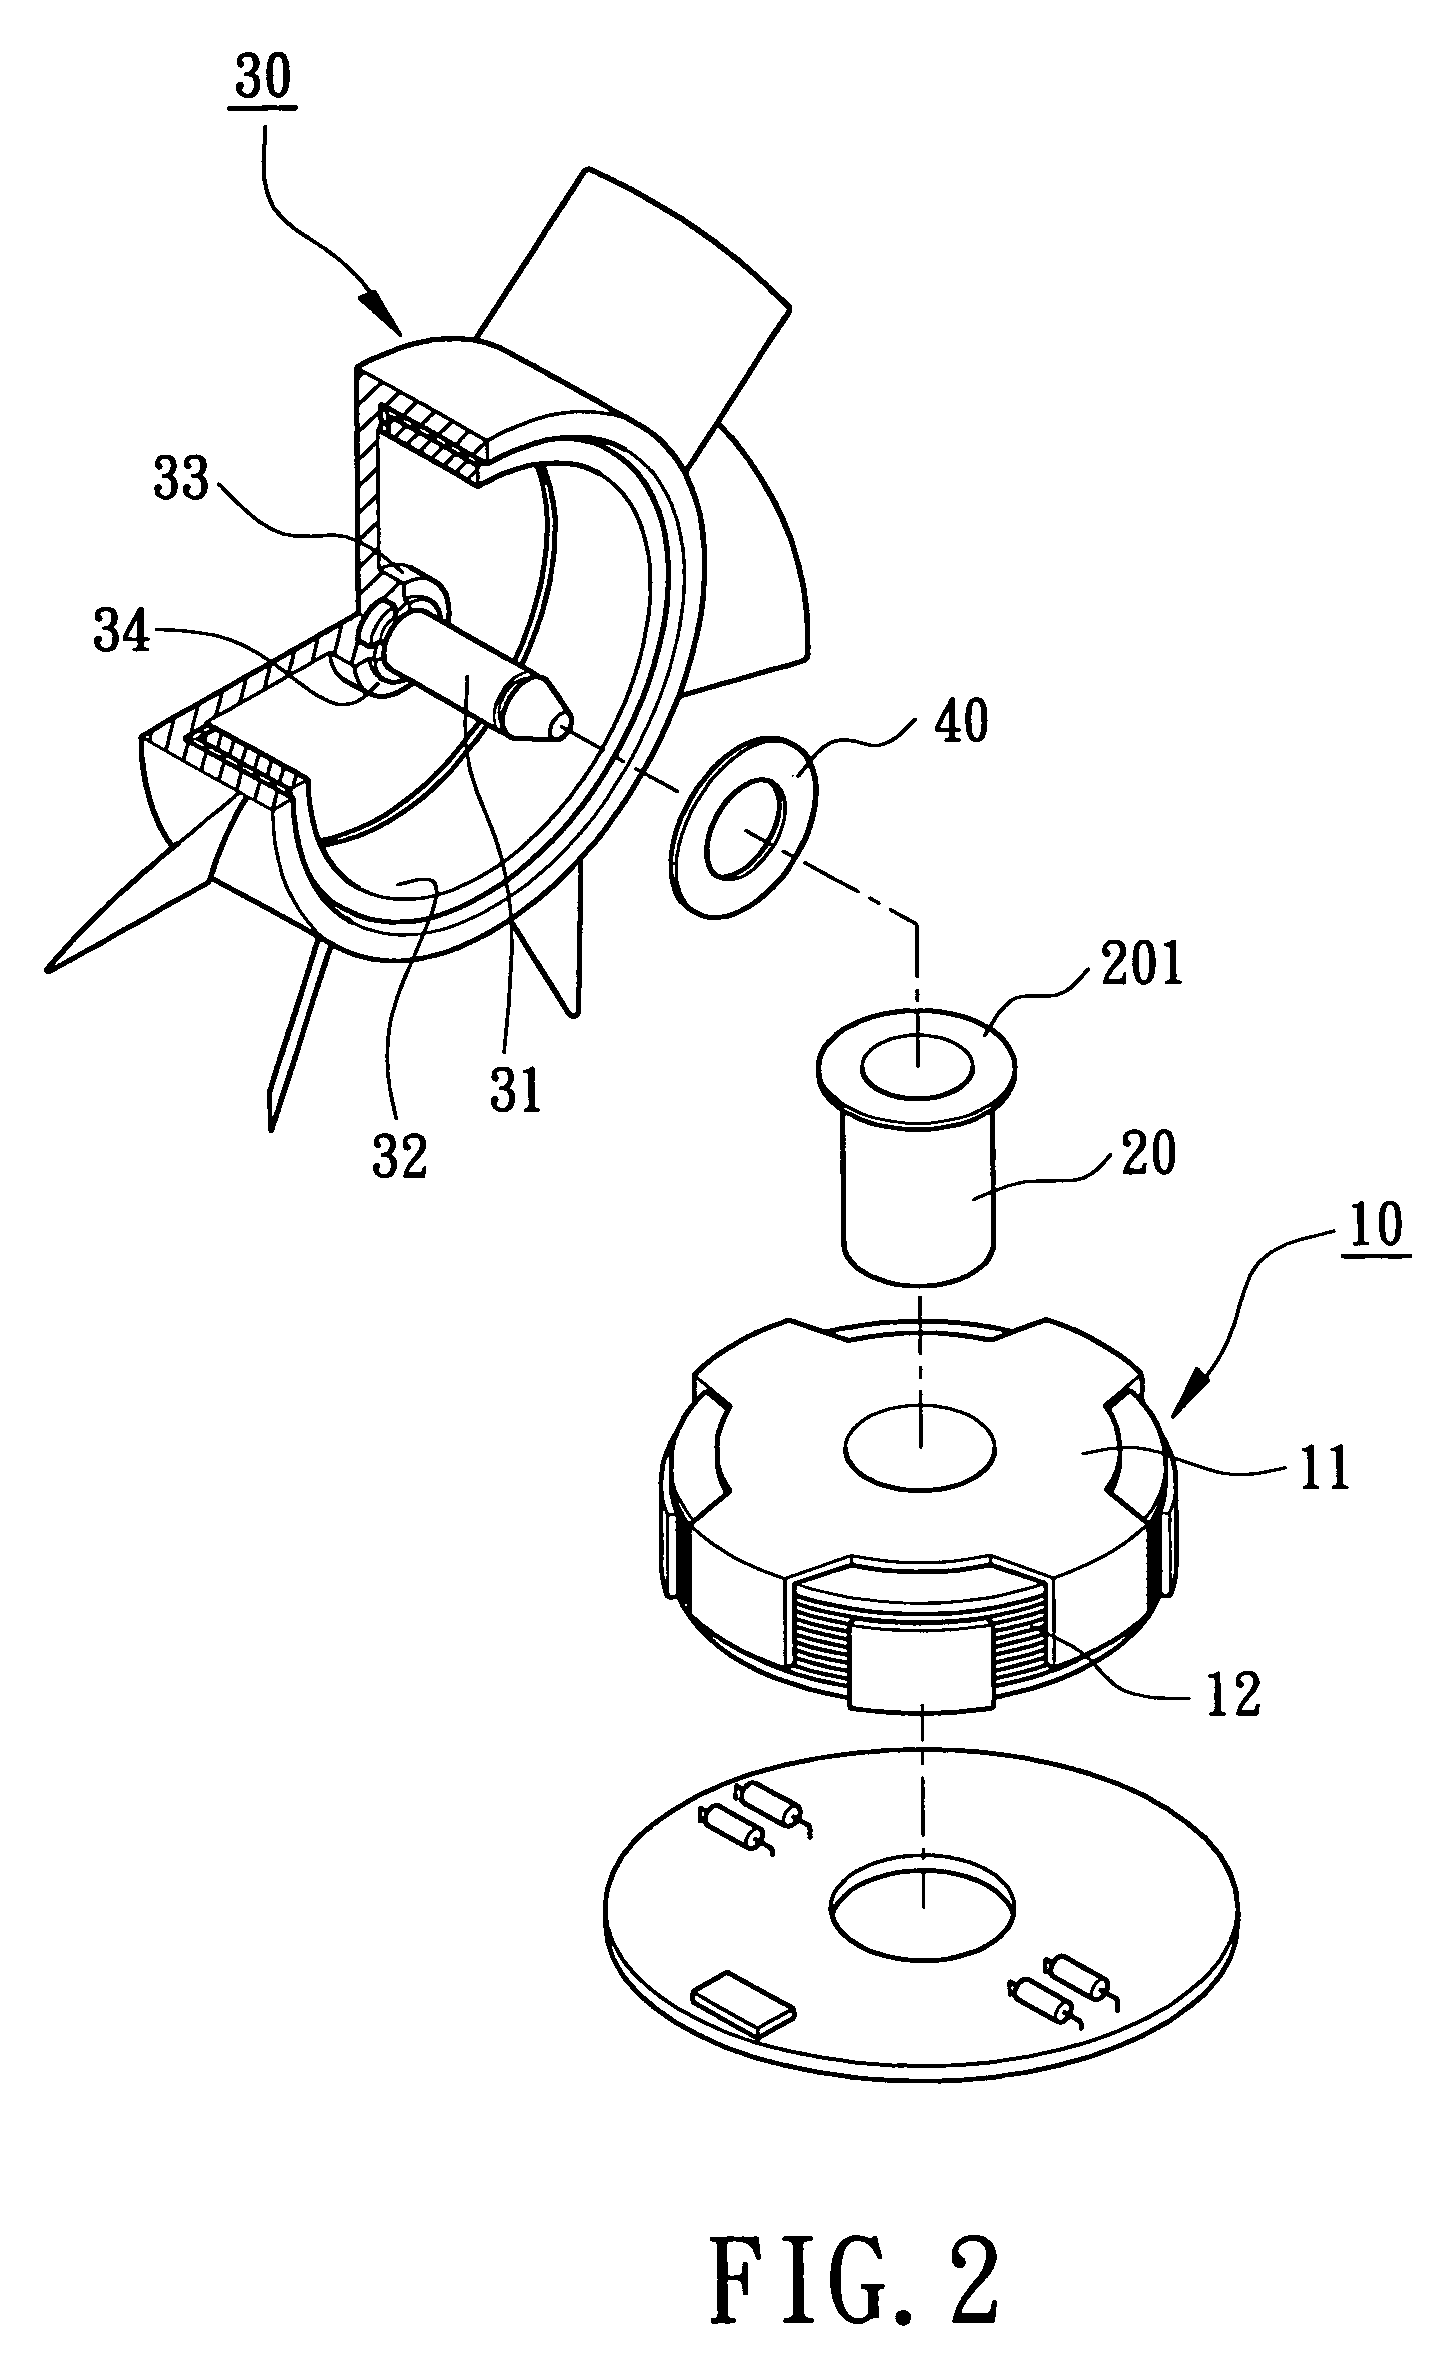 Prestressing structure for rotationally balancing a motor